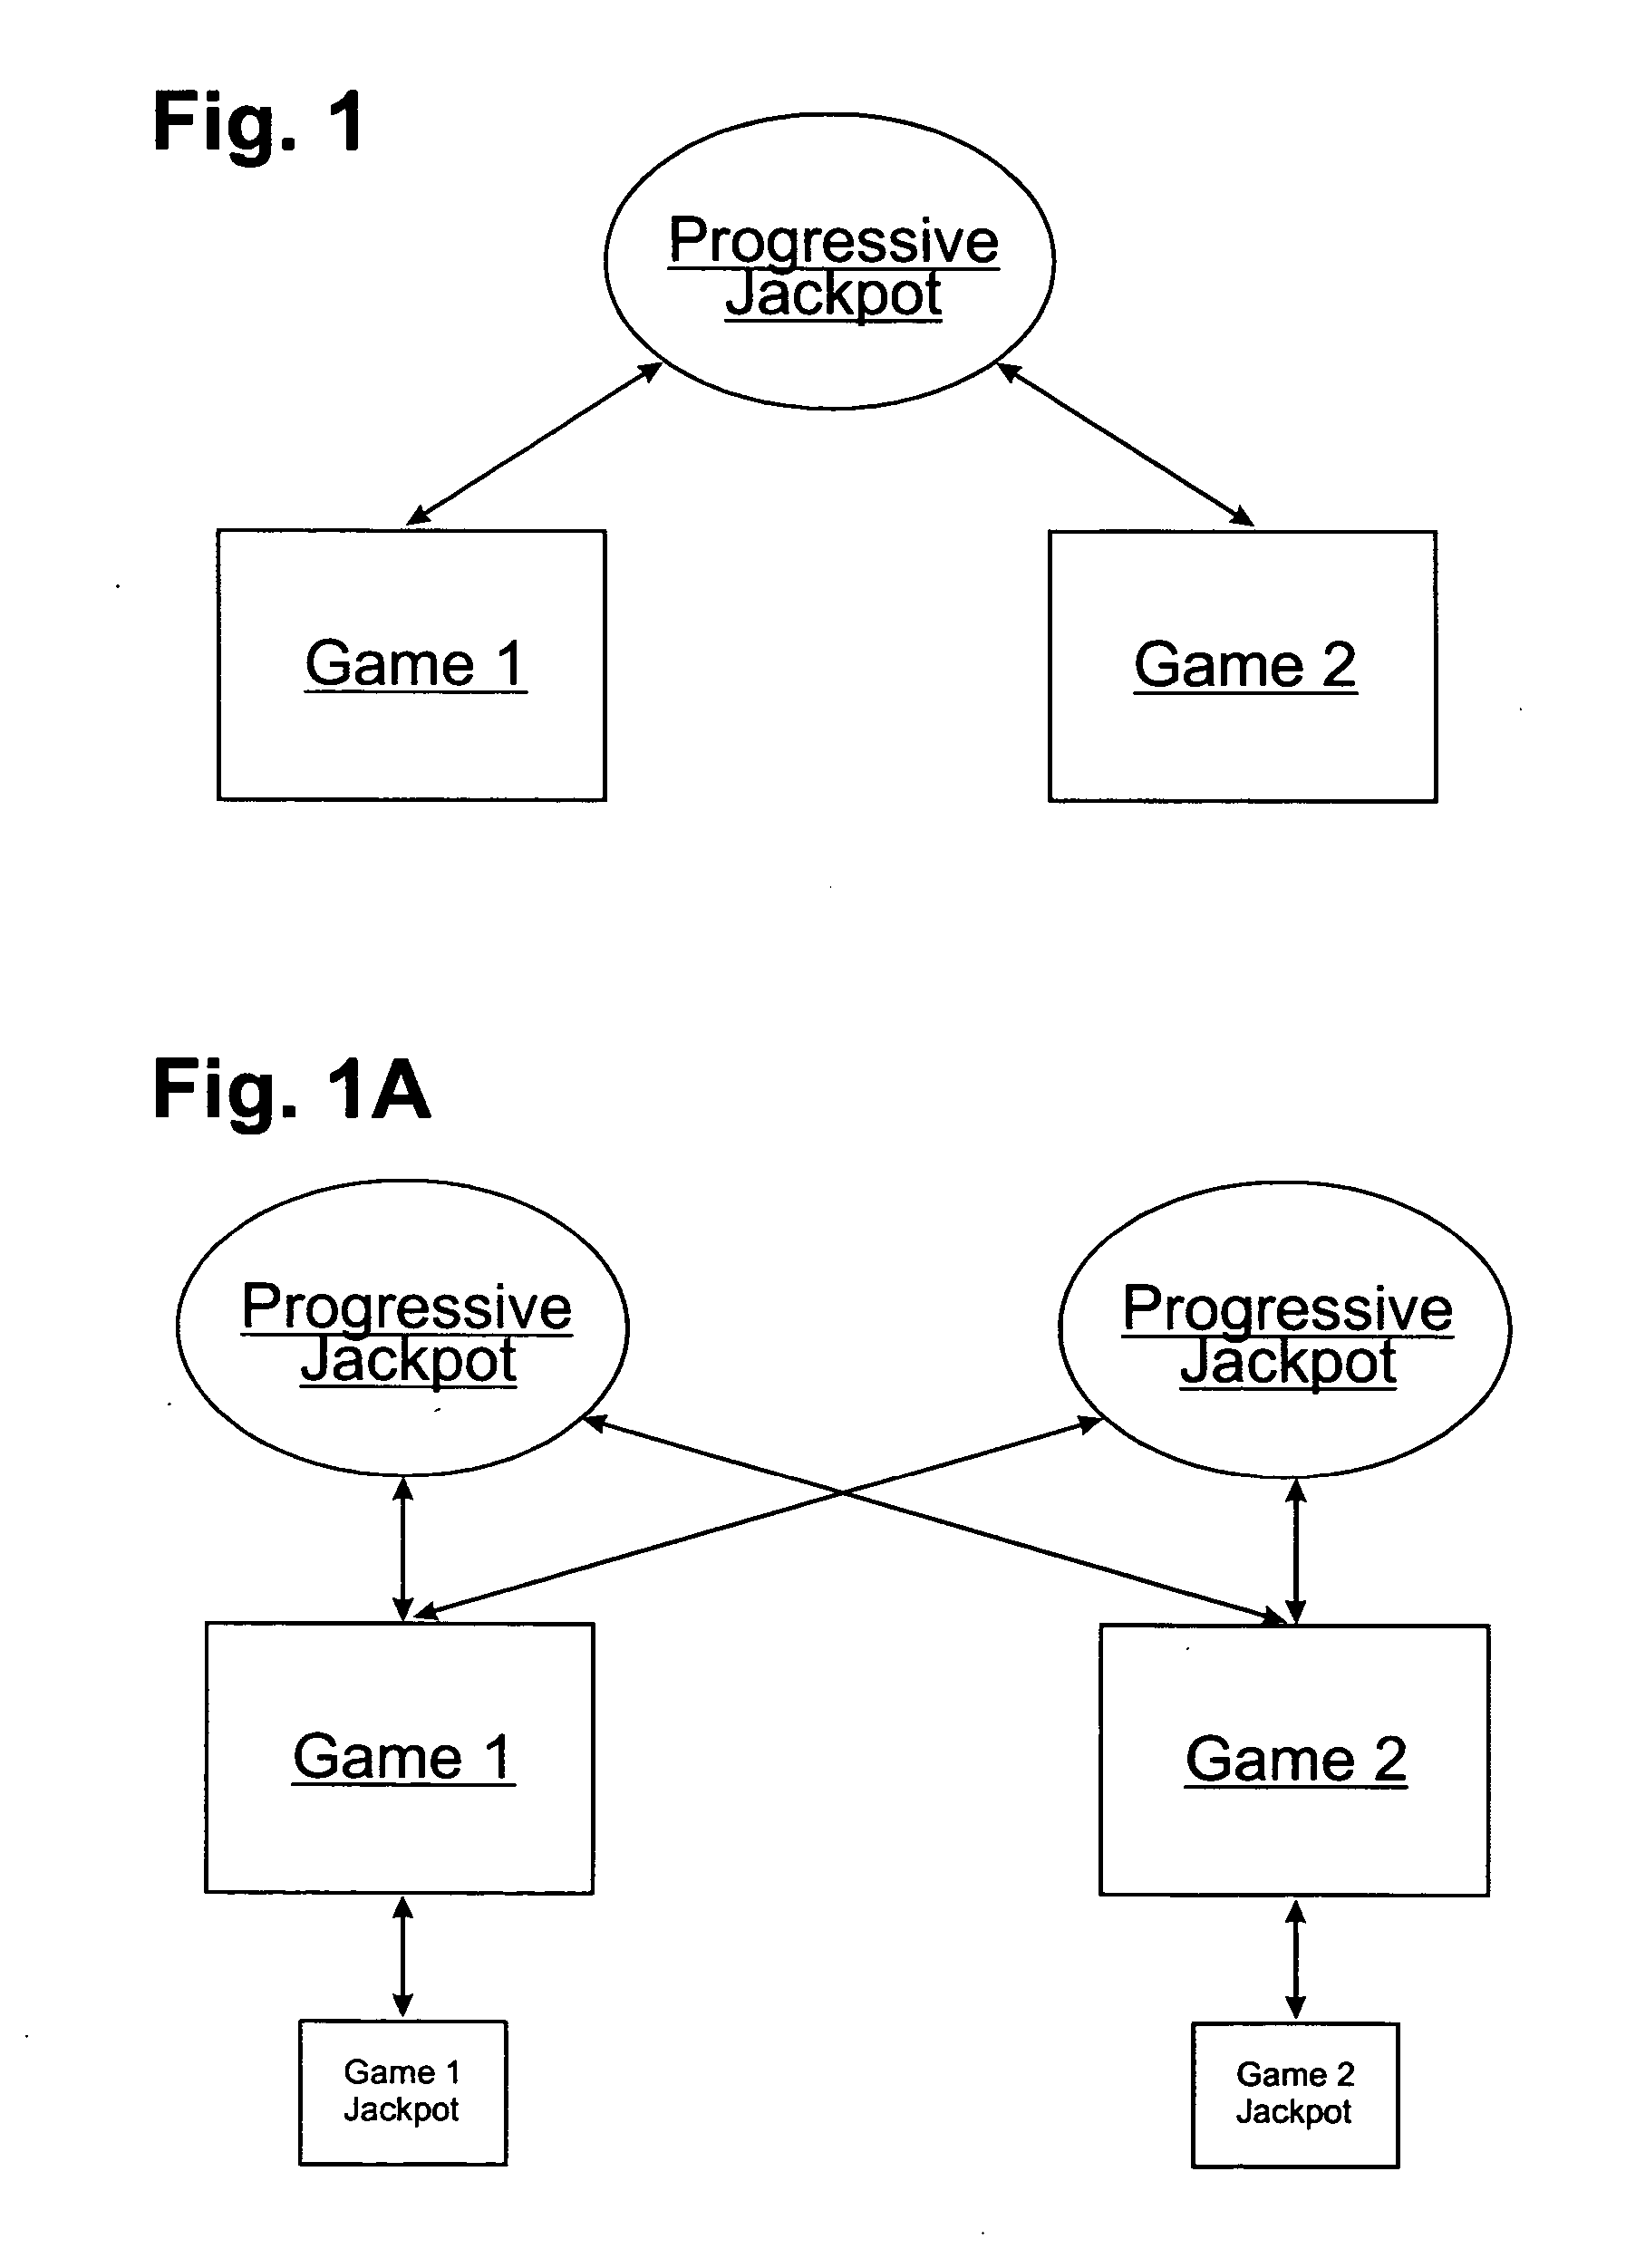 Gaming system for players of different games to compete for the same progressive jackpots in various gameplay settings